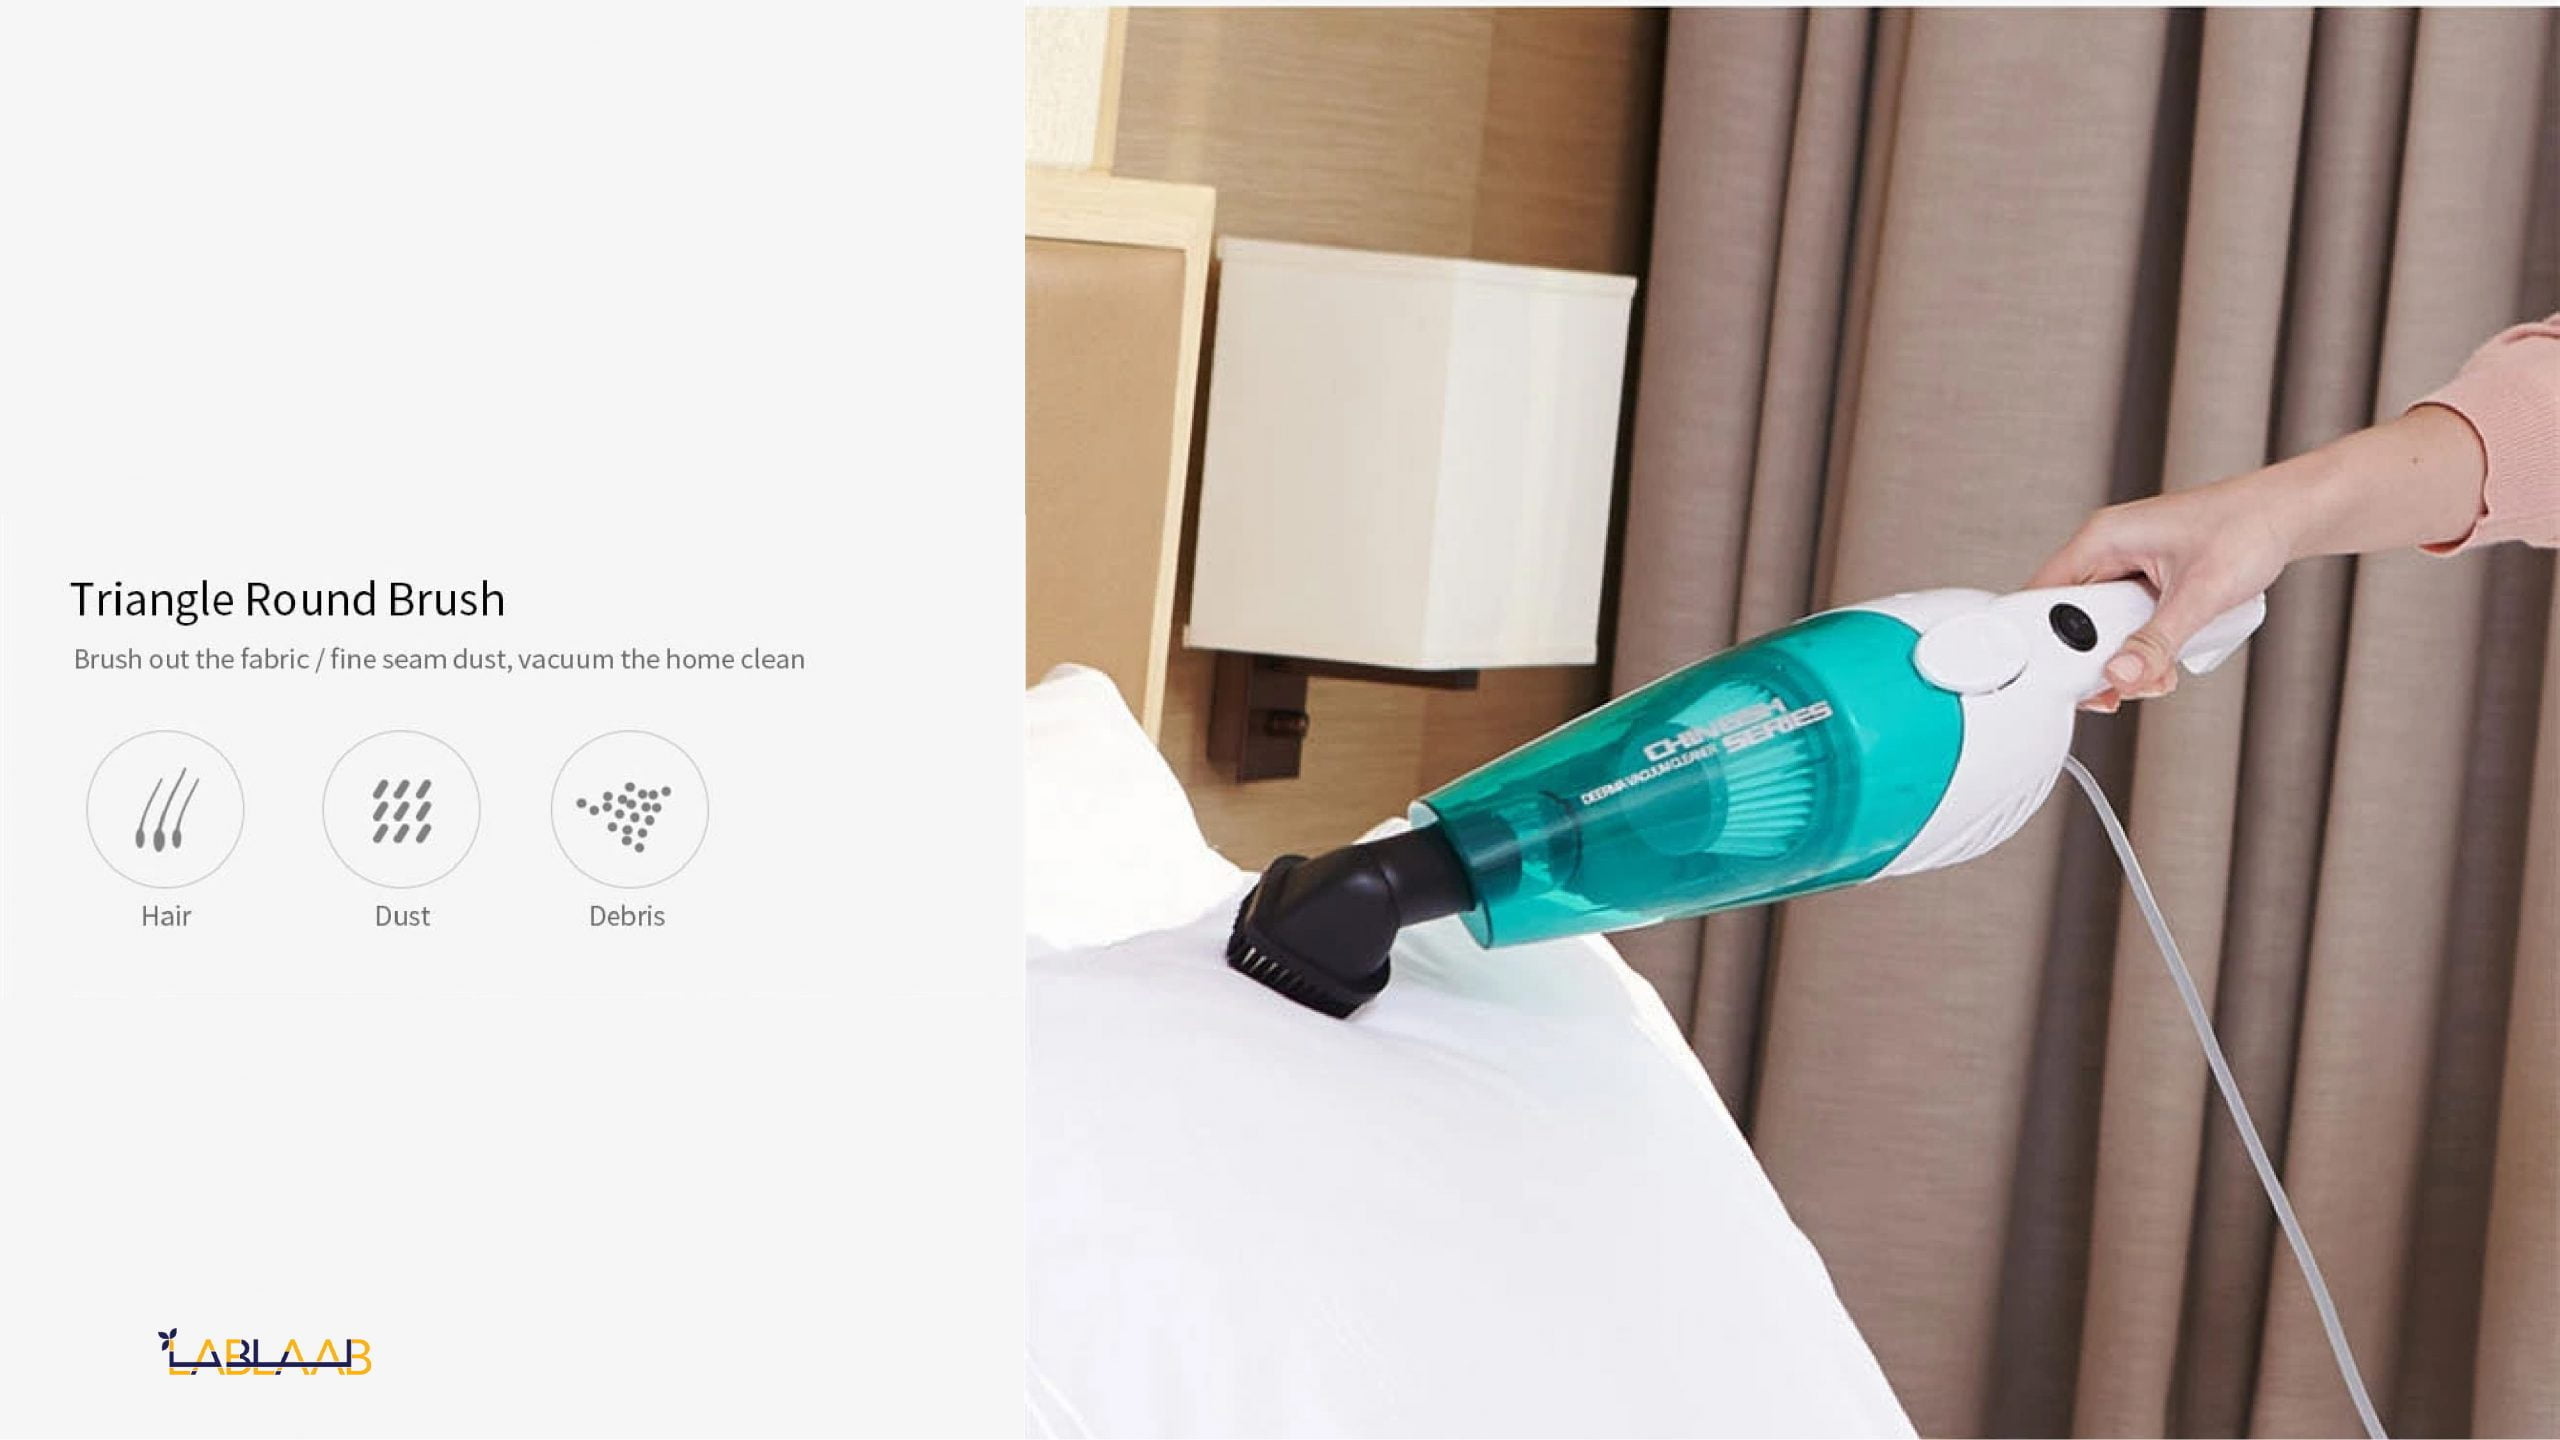 Vacuum 333 08 Scaled Xiaomi Deerma Dx118C Upright Vacuum Cleaner Mini 2-In-1 Pushrod Handheld Cleaner With 16000Pa Super Suction- Green Https://Www.youtube.com/Watch?V=A4_Ujrhyw_I Deerma Dx118C Vacuum Cleaner Deerma Dx118C Vacuum Cleaner 2-In-1 Pushrod Handheld Cleaner With 16000Pa Super Suction